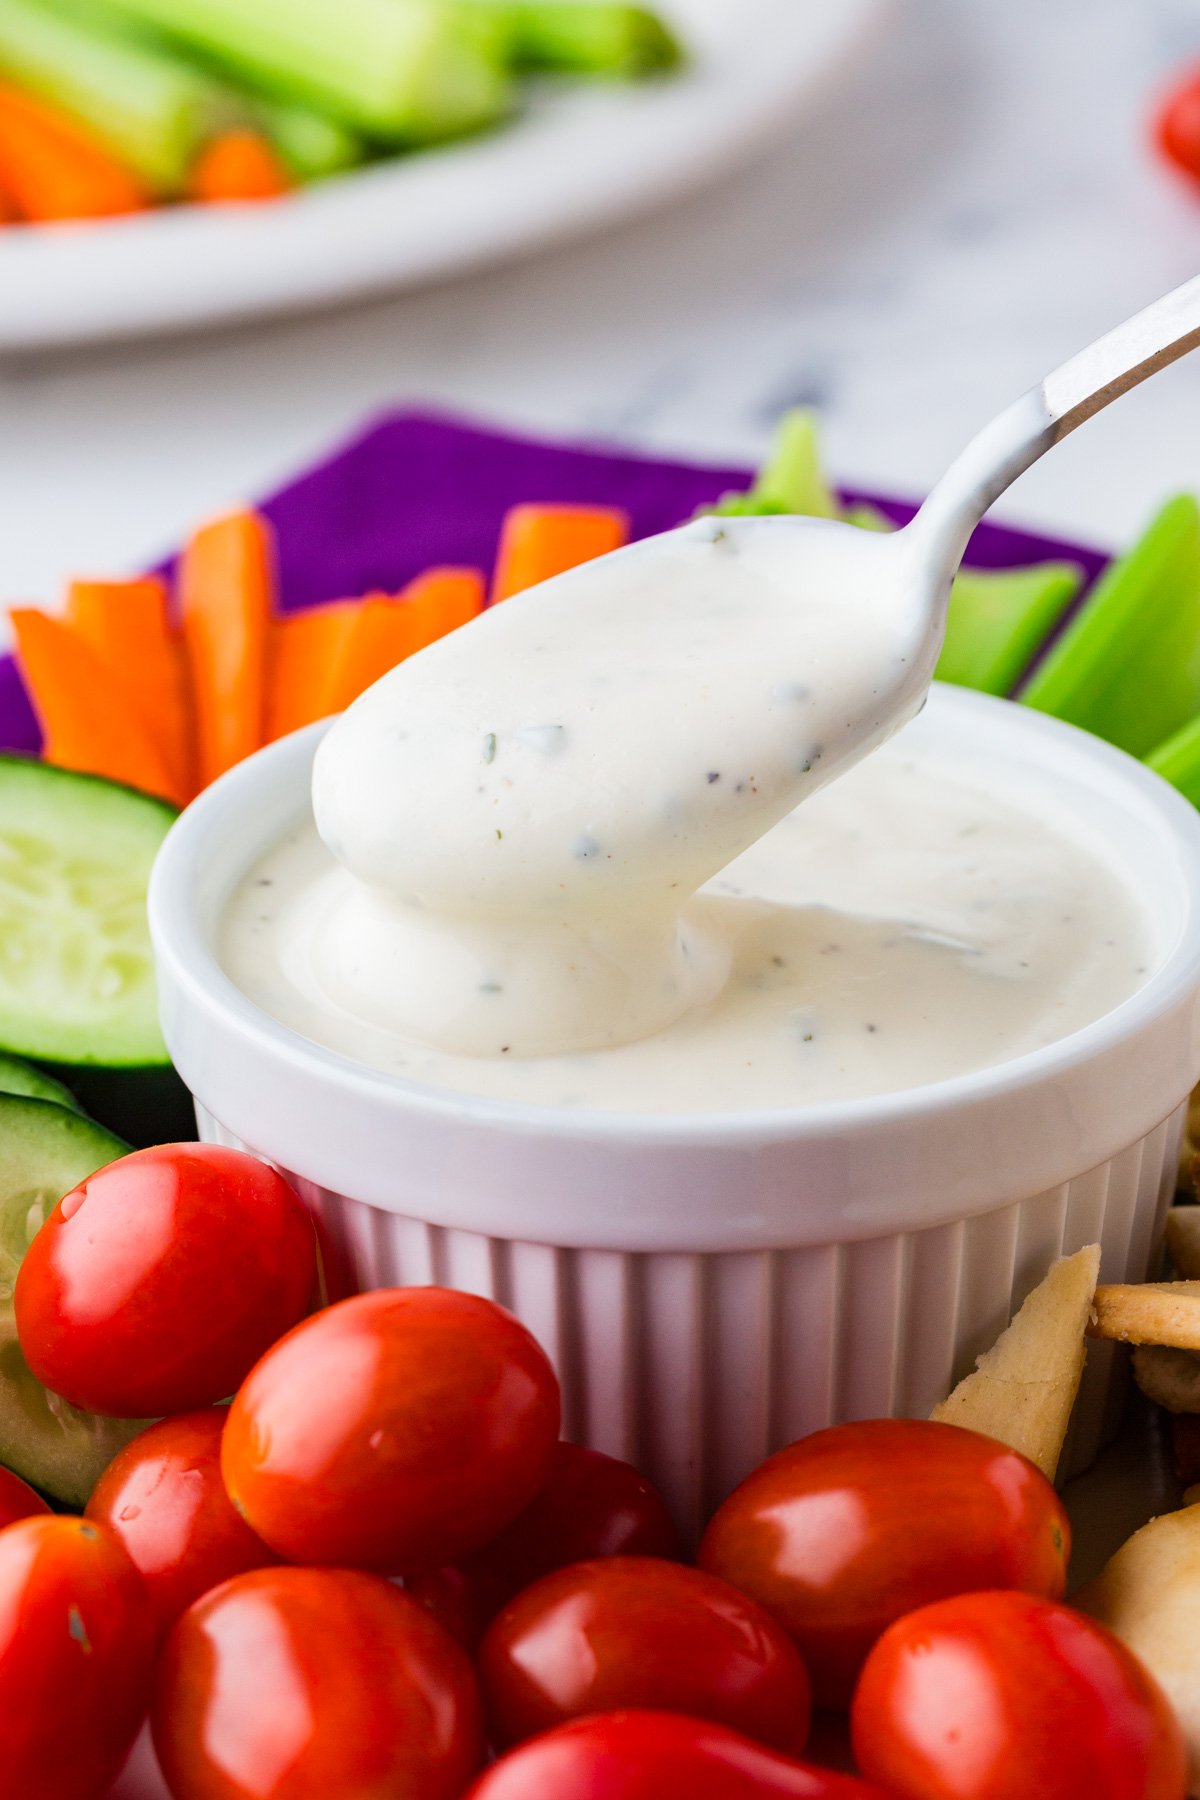 Spoon drizzling ranch dressing into a small bowl surrounded by colorful fresh vegetables.